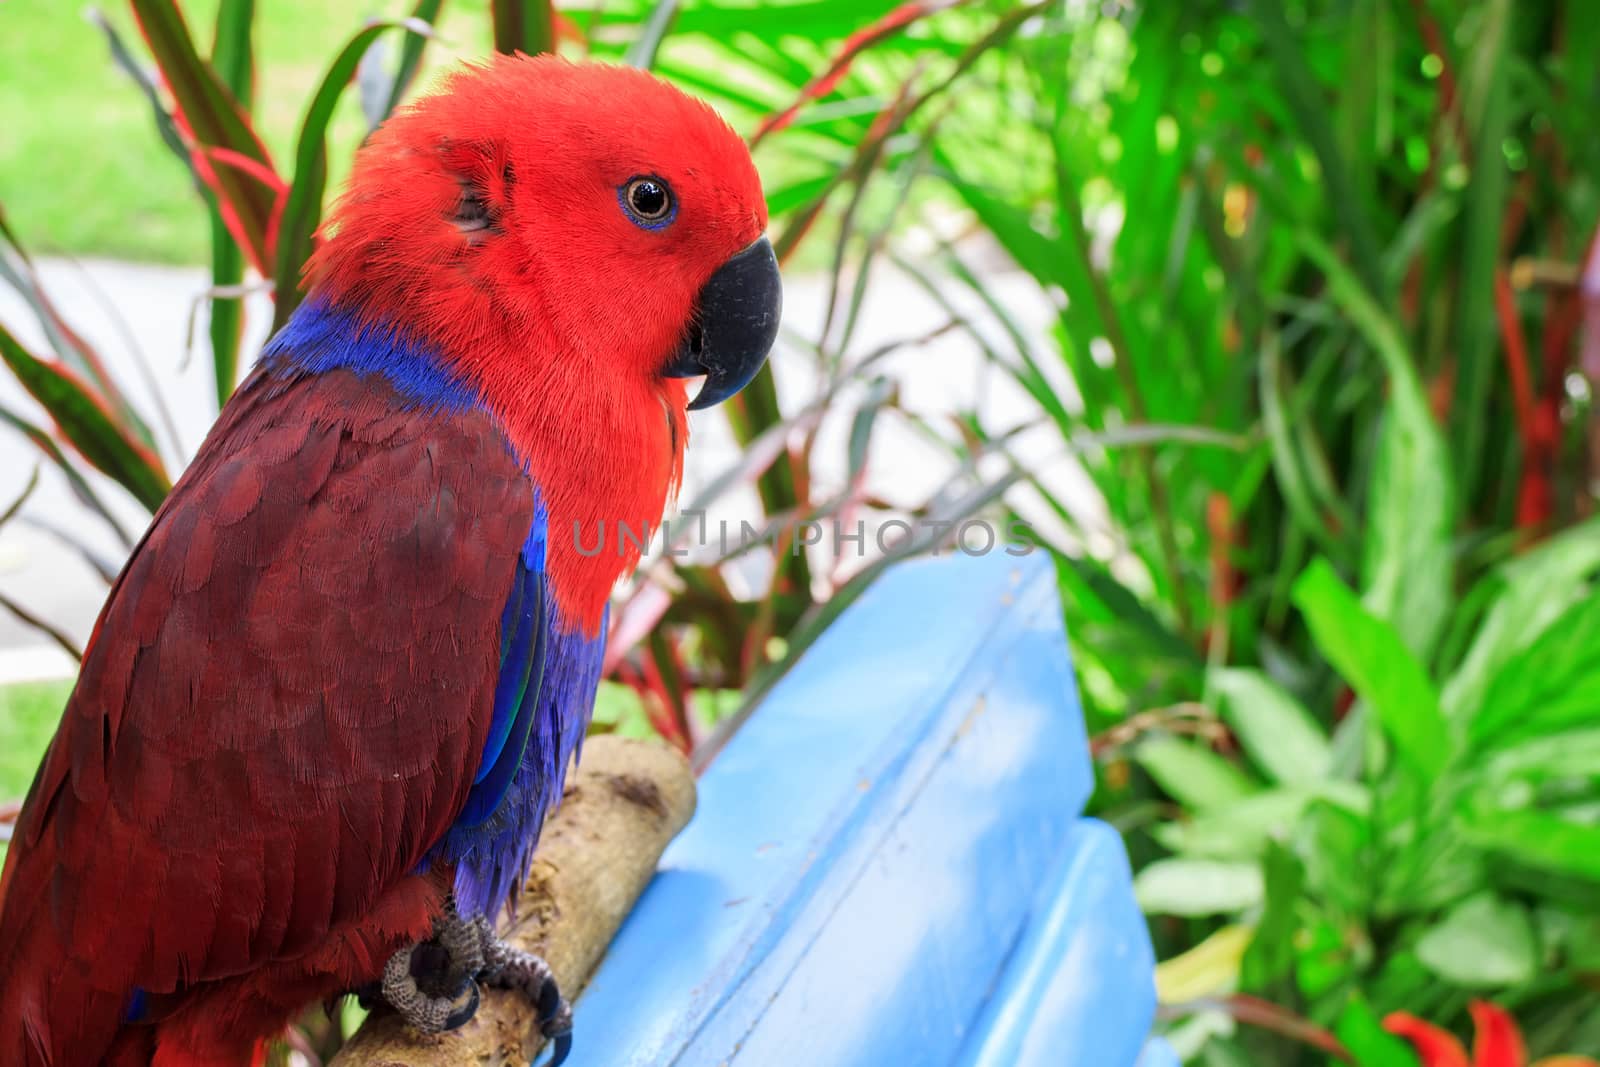 Beautiful Eclectus Parrot (Eclectus roratus) on branches in Zoo Khao Kheow, Thailand.